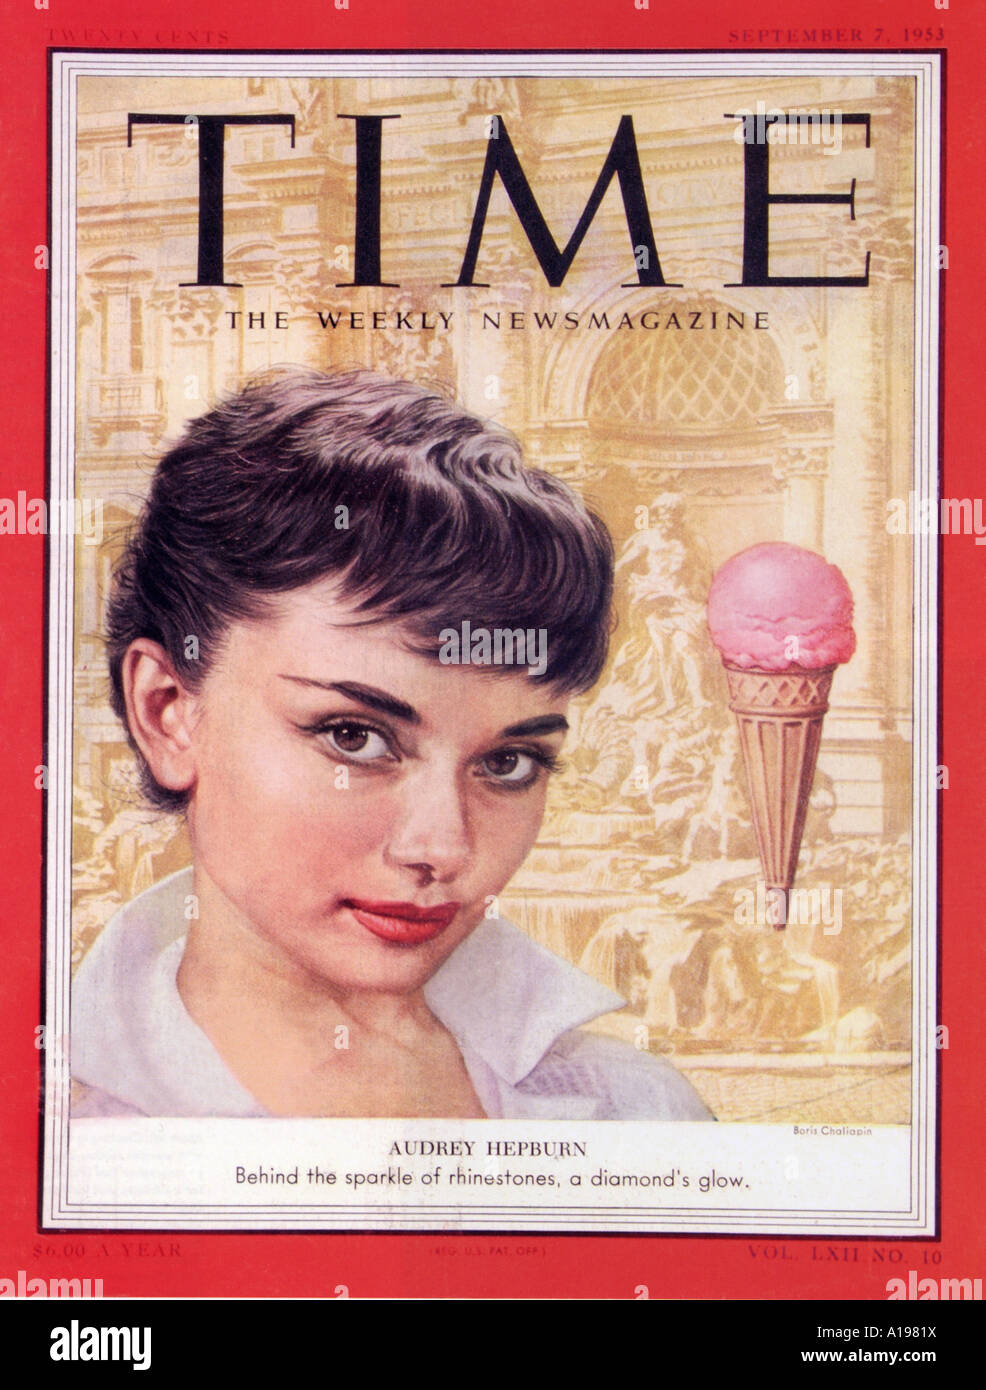 AUDREY HEPBURN on the cover of Time magazine 7 September 1953 Stock Photo